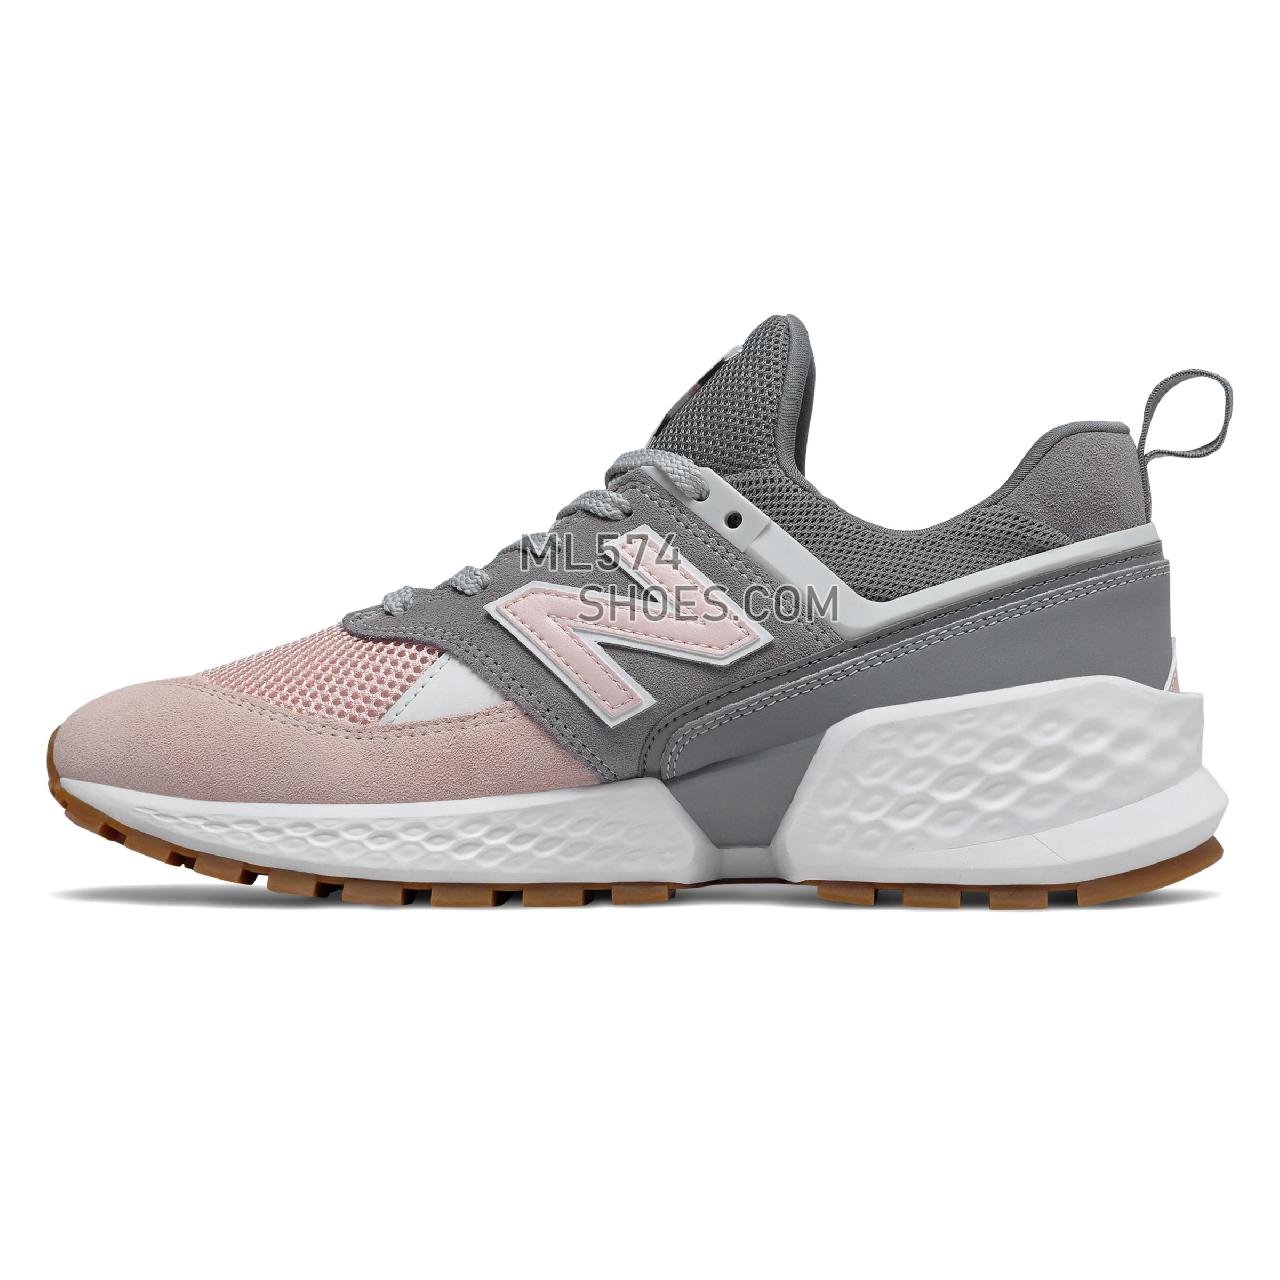 New Balance 574 Sport - Men's Sport Style Sneakers - Gunmetal with Oyster Pink - MS574JUC